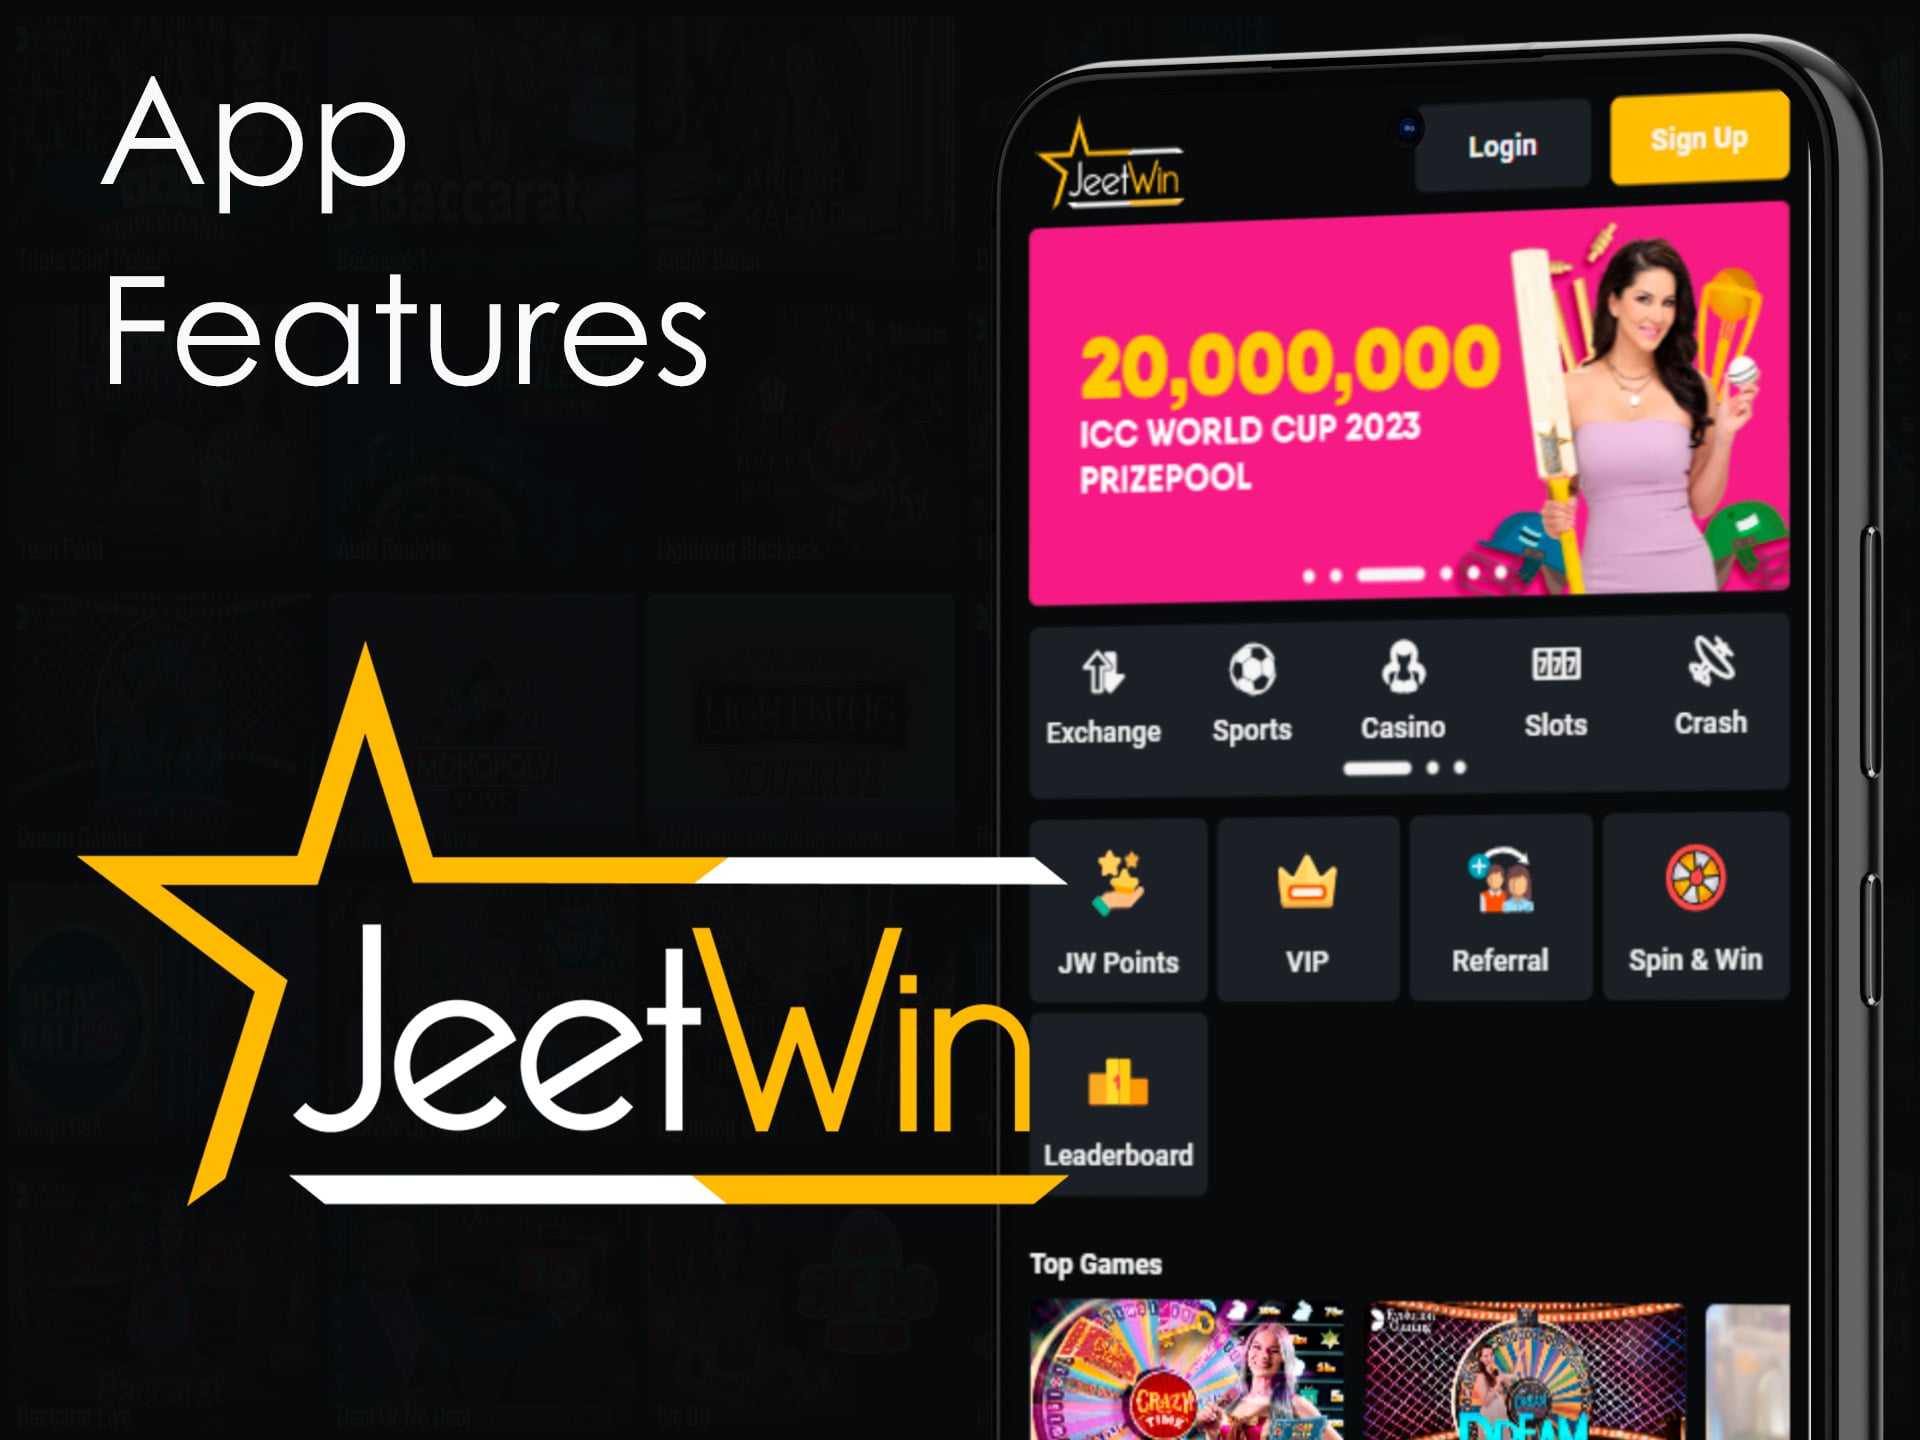 jeetwin app features